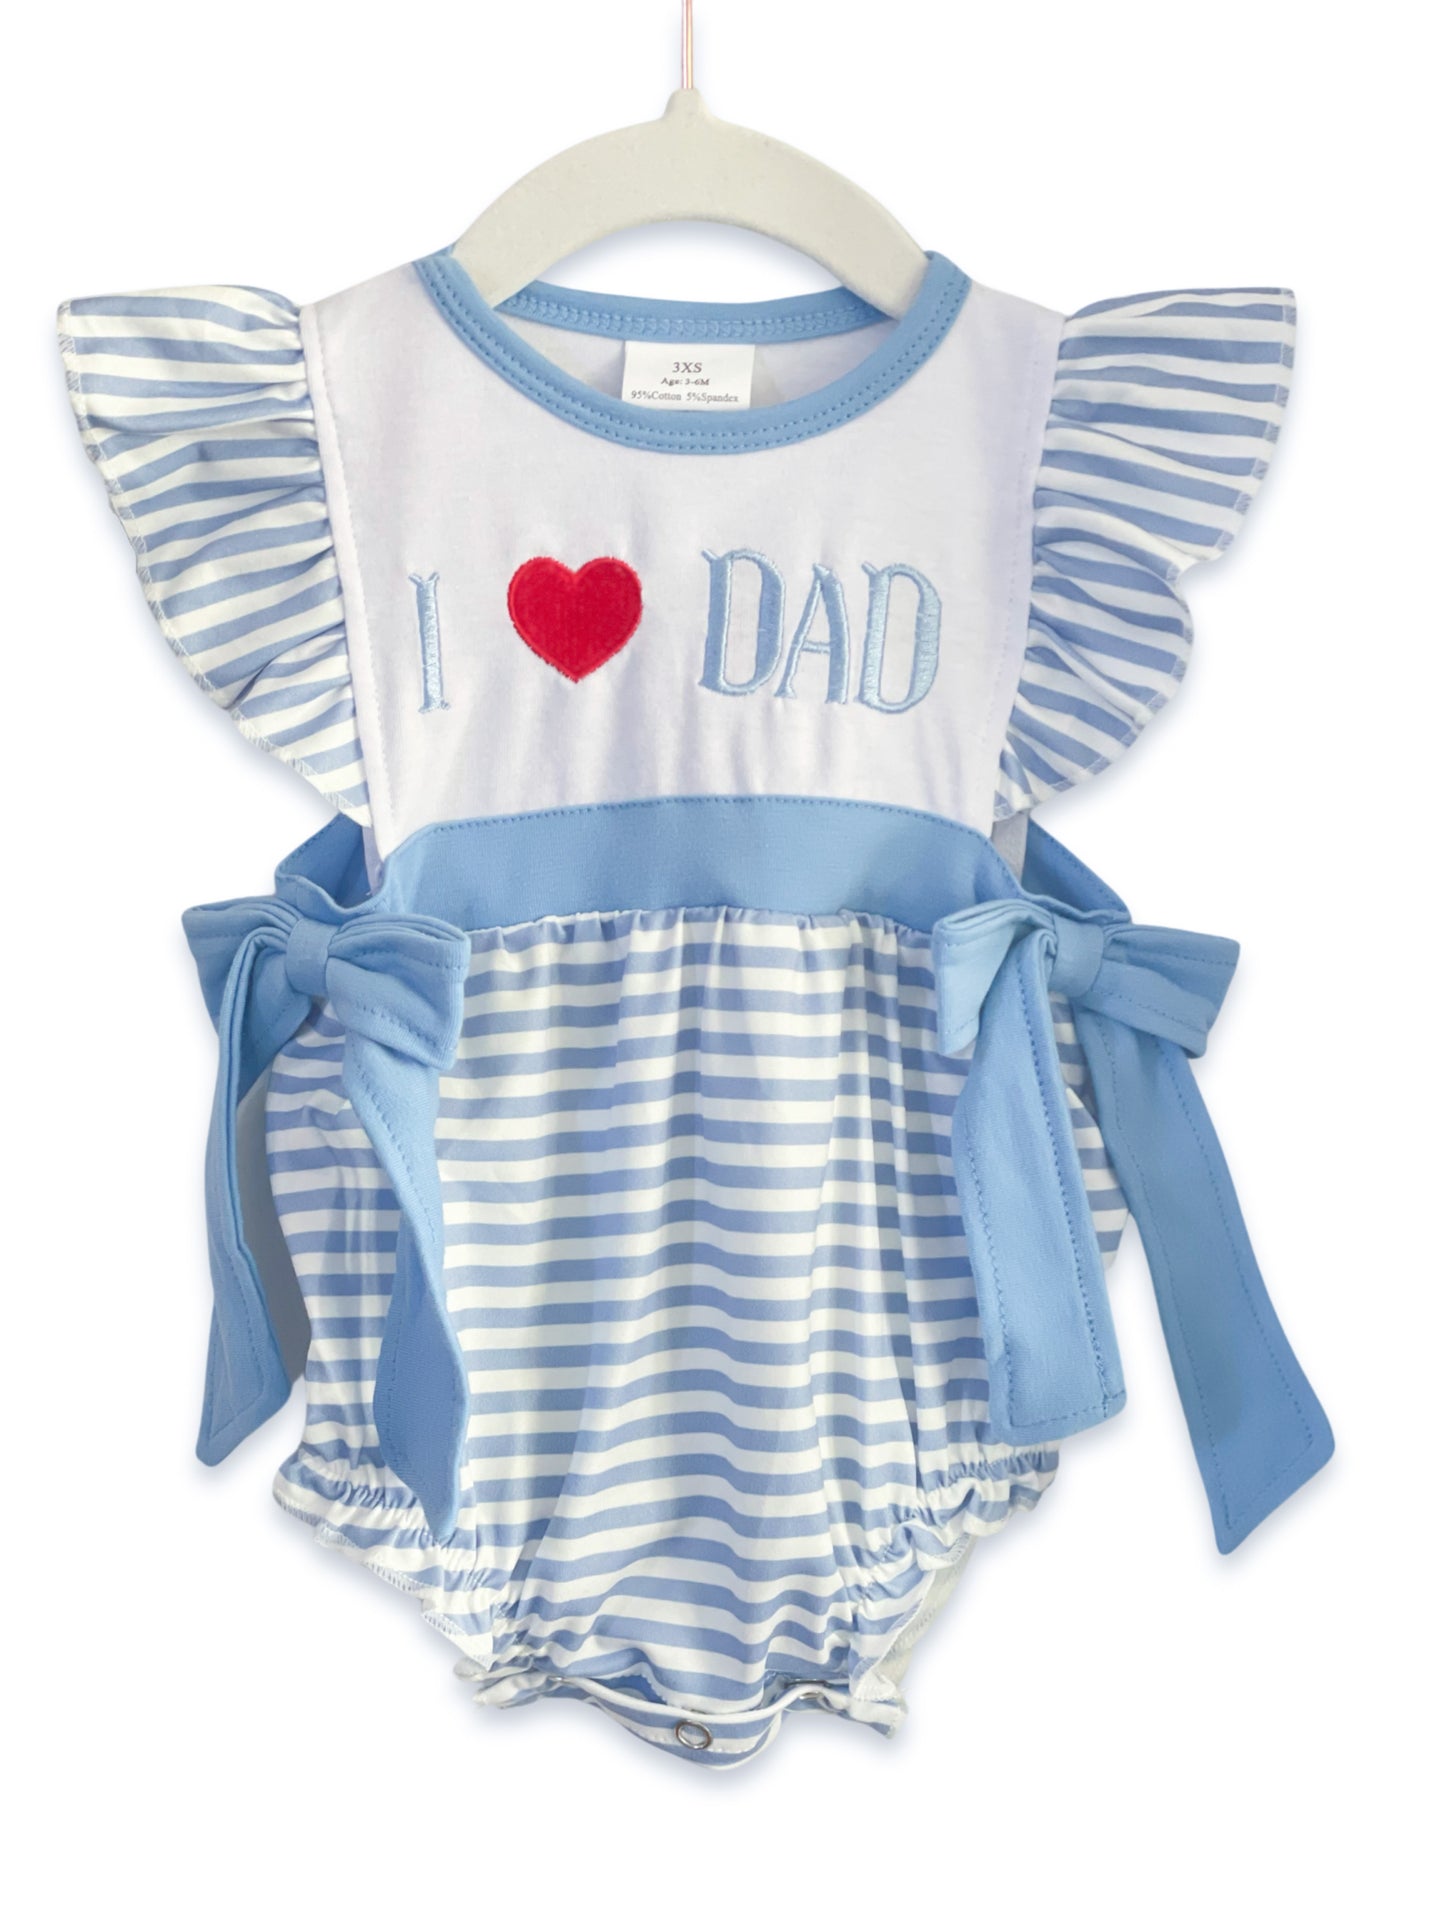 I Love Dad Embroidered Ruffle Romper